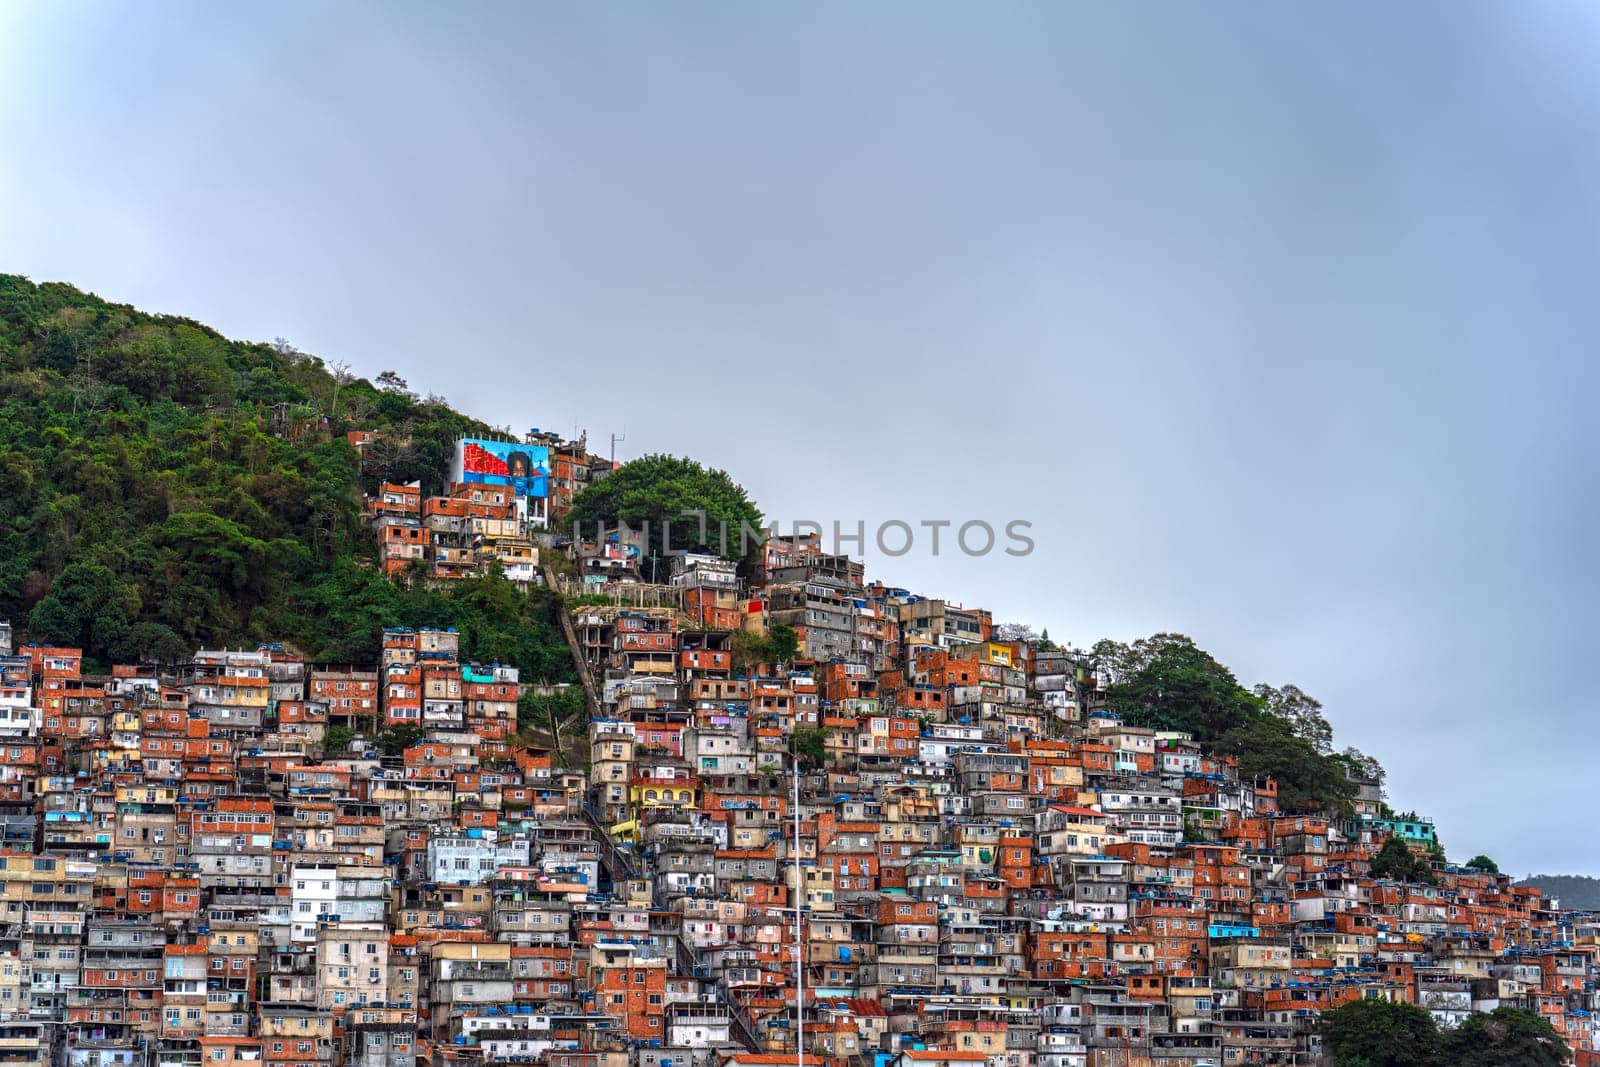 Photo depicts a colorful, crowded favela in Rio de Janeiro, symbolizing the struggle of poverty in Brazil.